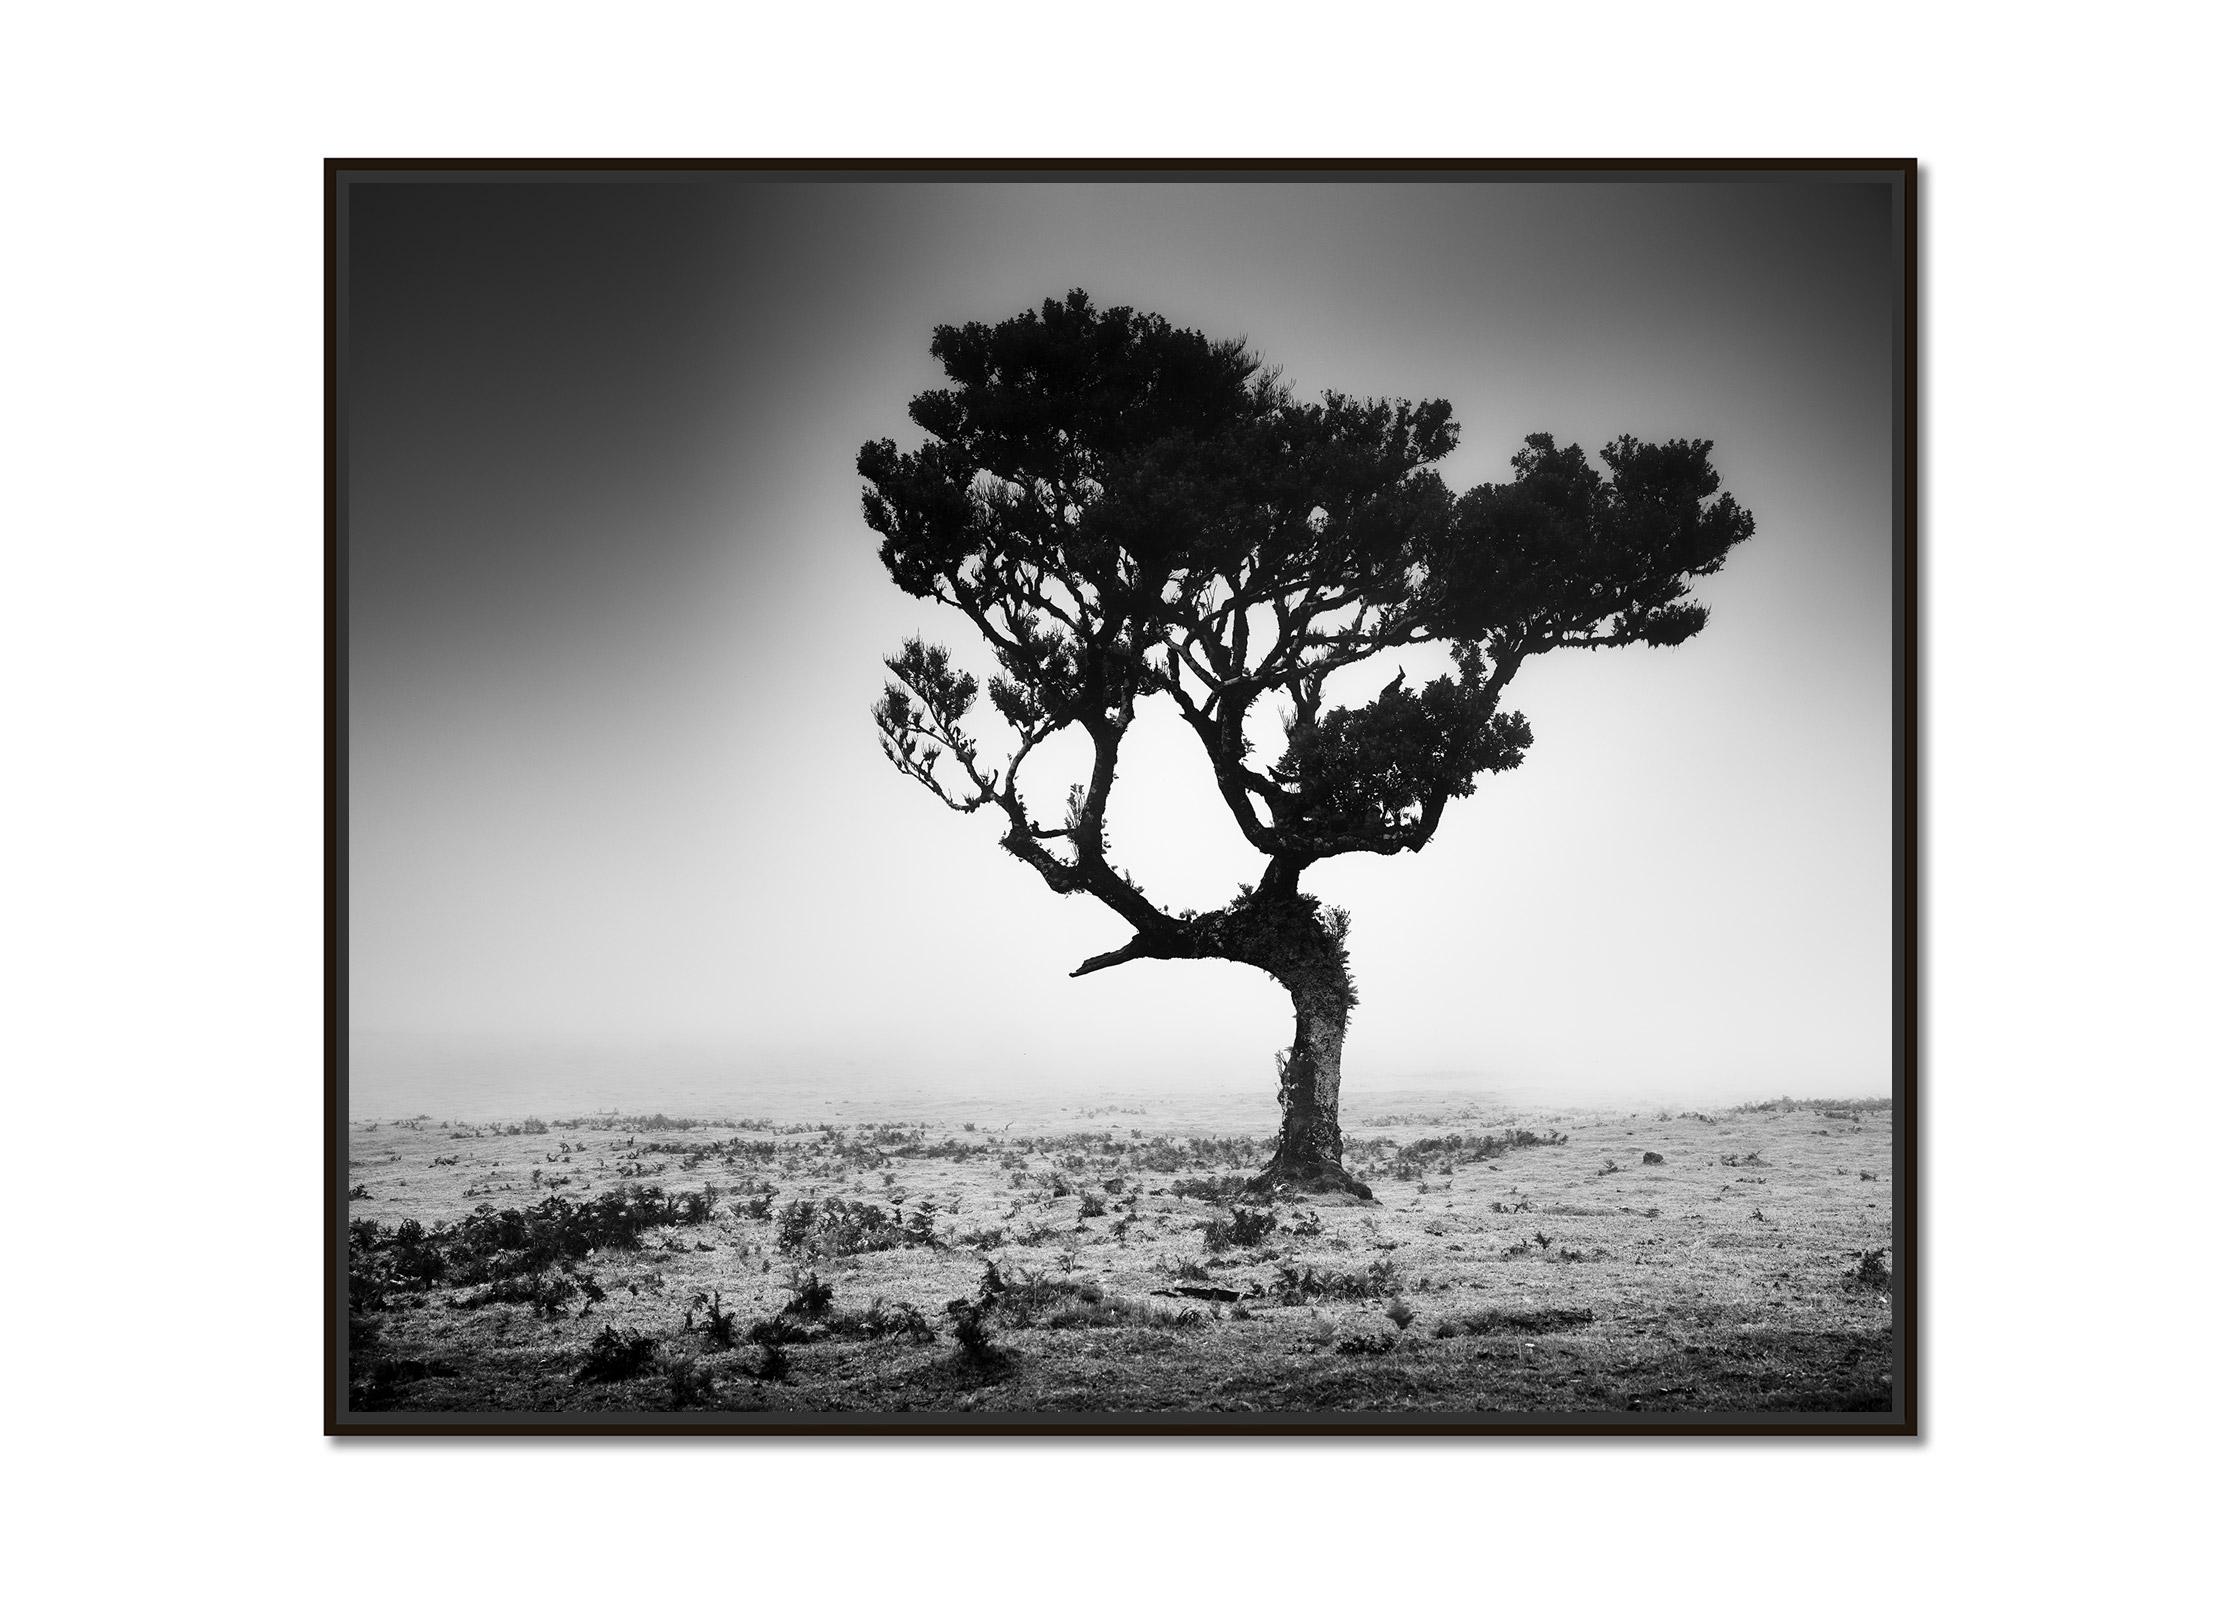 Mystical Tree, foggy, Fanal, Madeira, black and white art landscape photography - Photograph by Gerald Berghammer